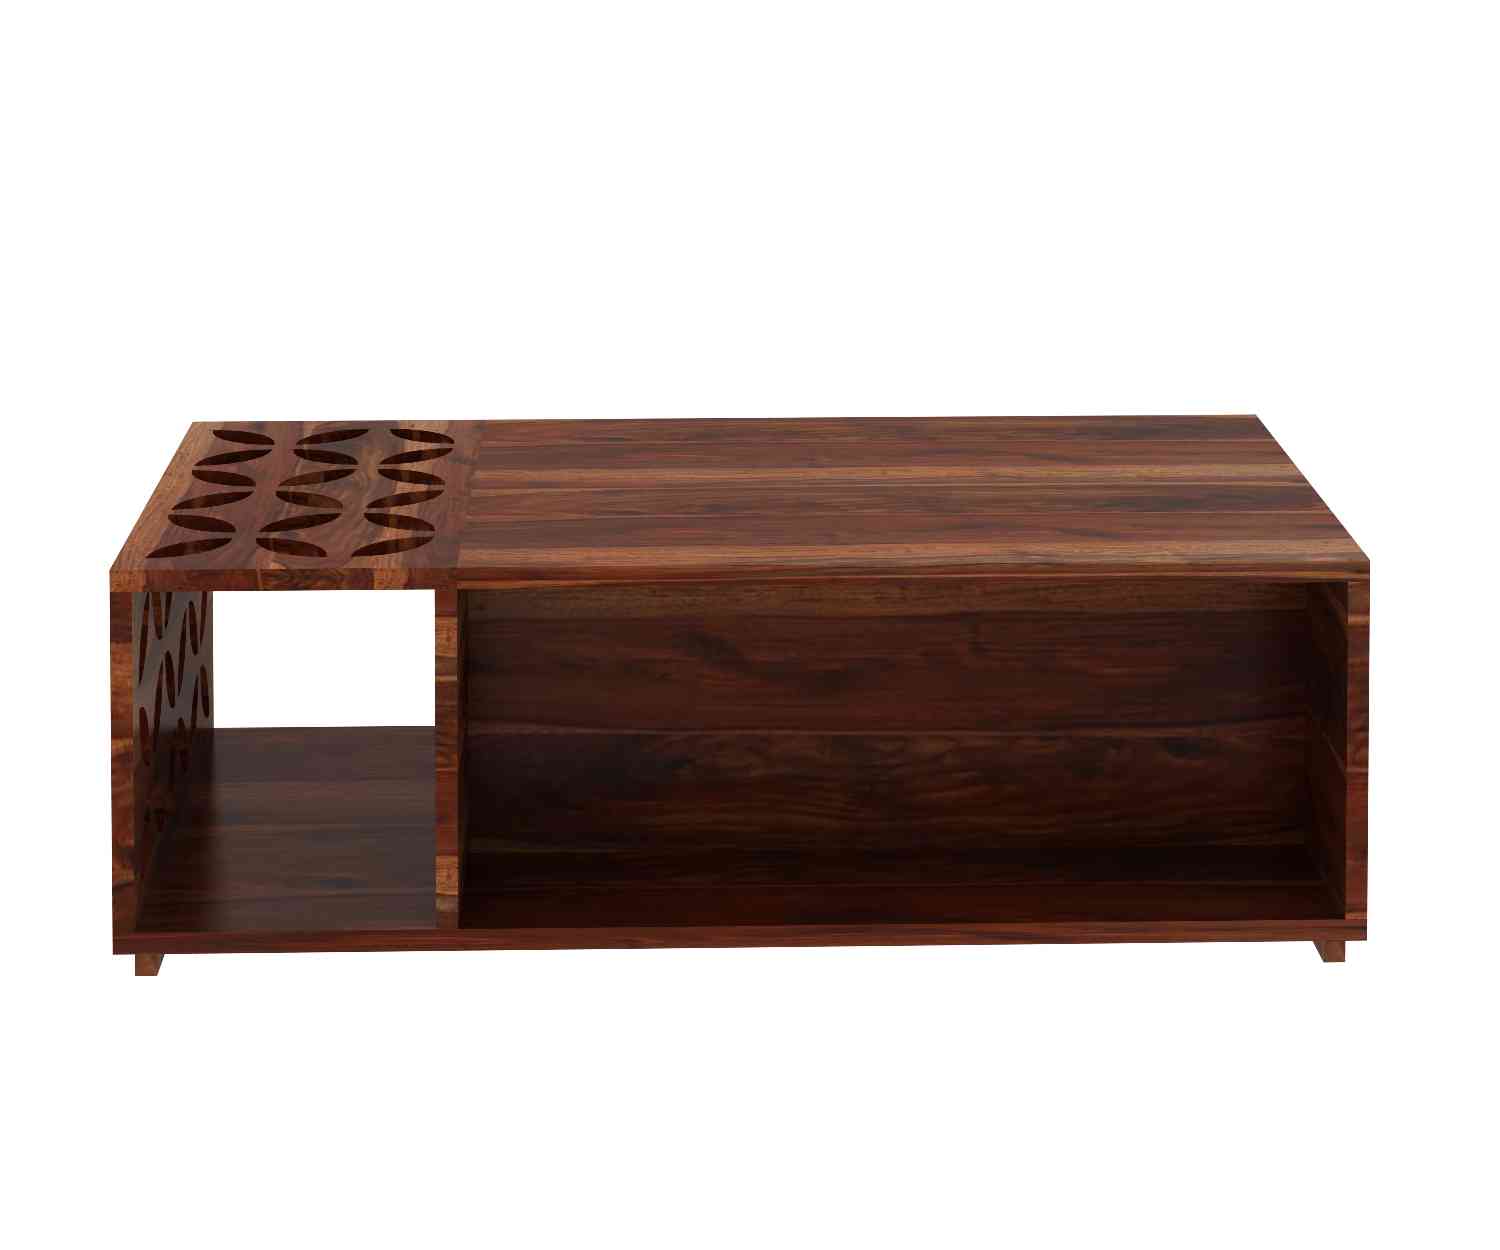 Monstro Solid Sheesham Wood Coffee Table (Natural Finish)